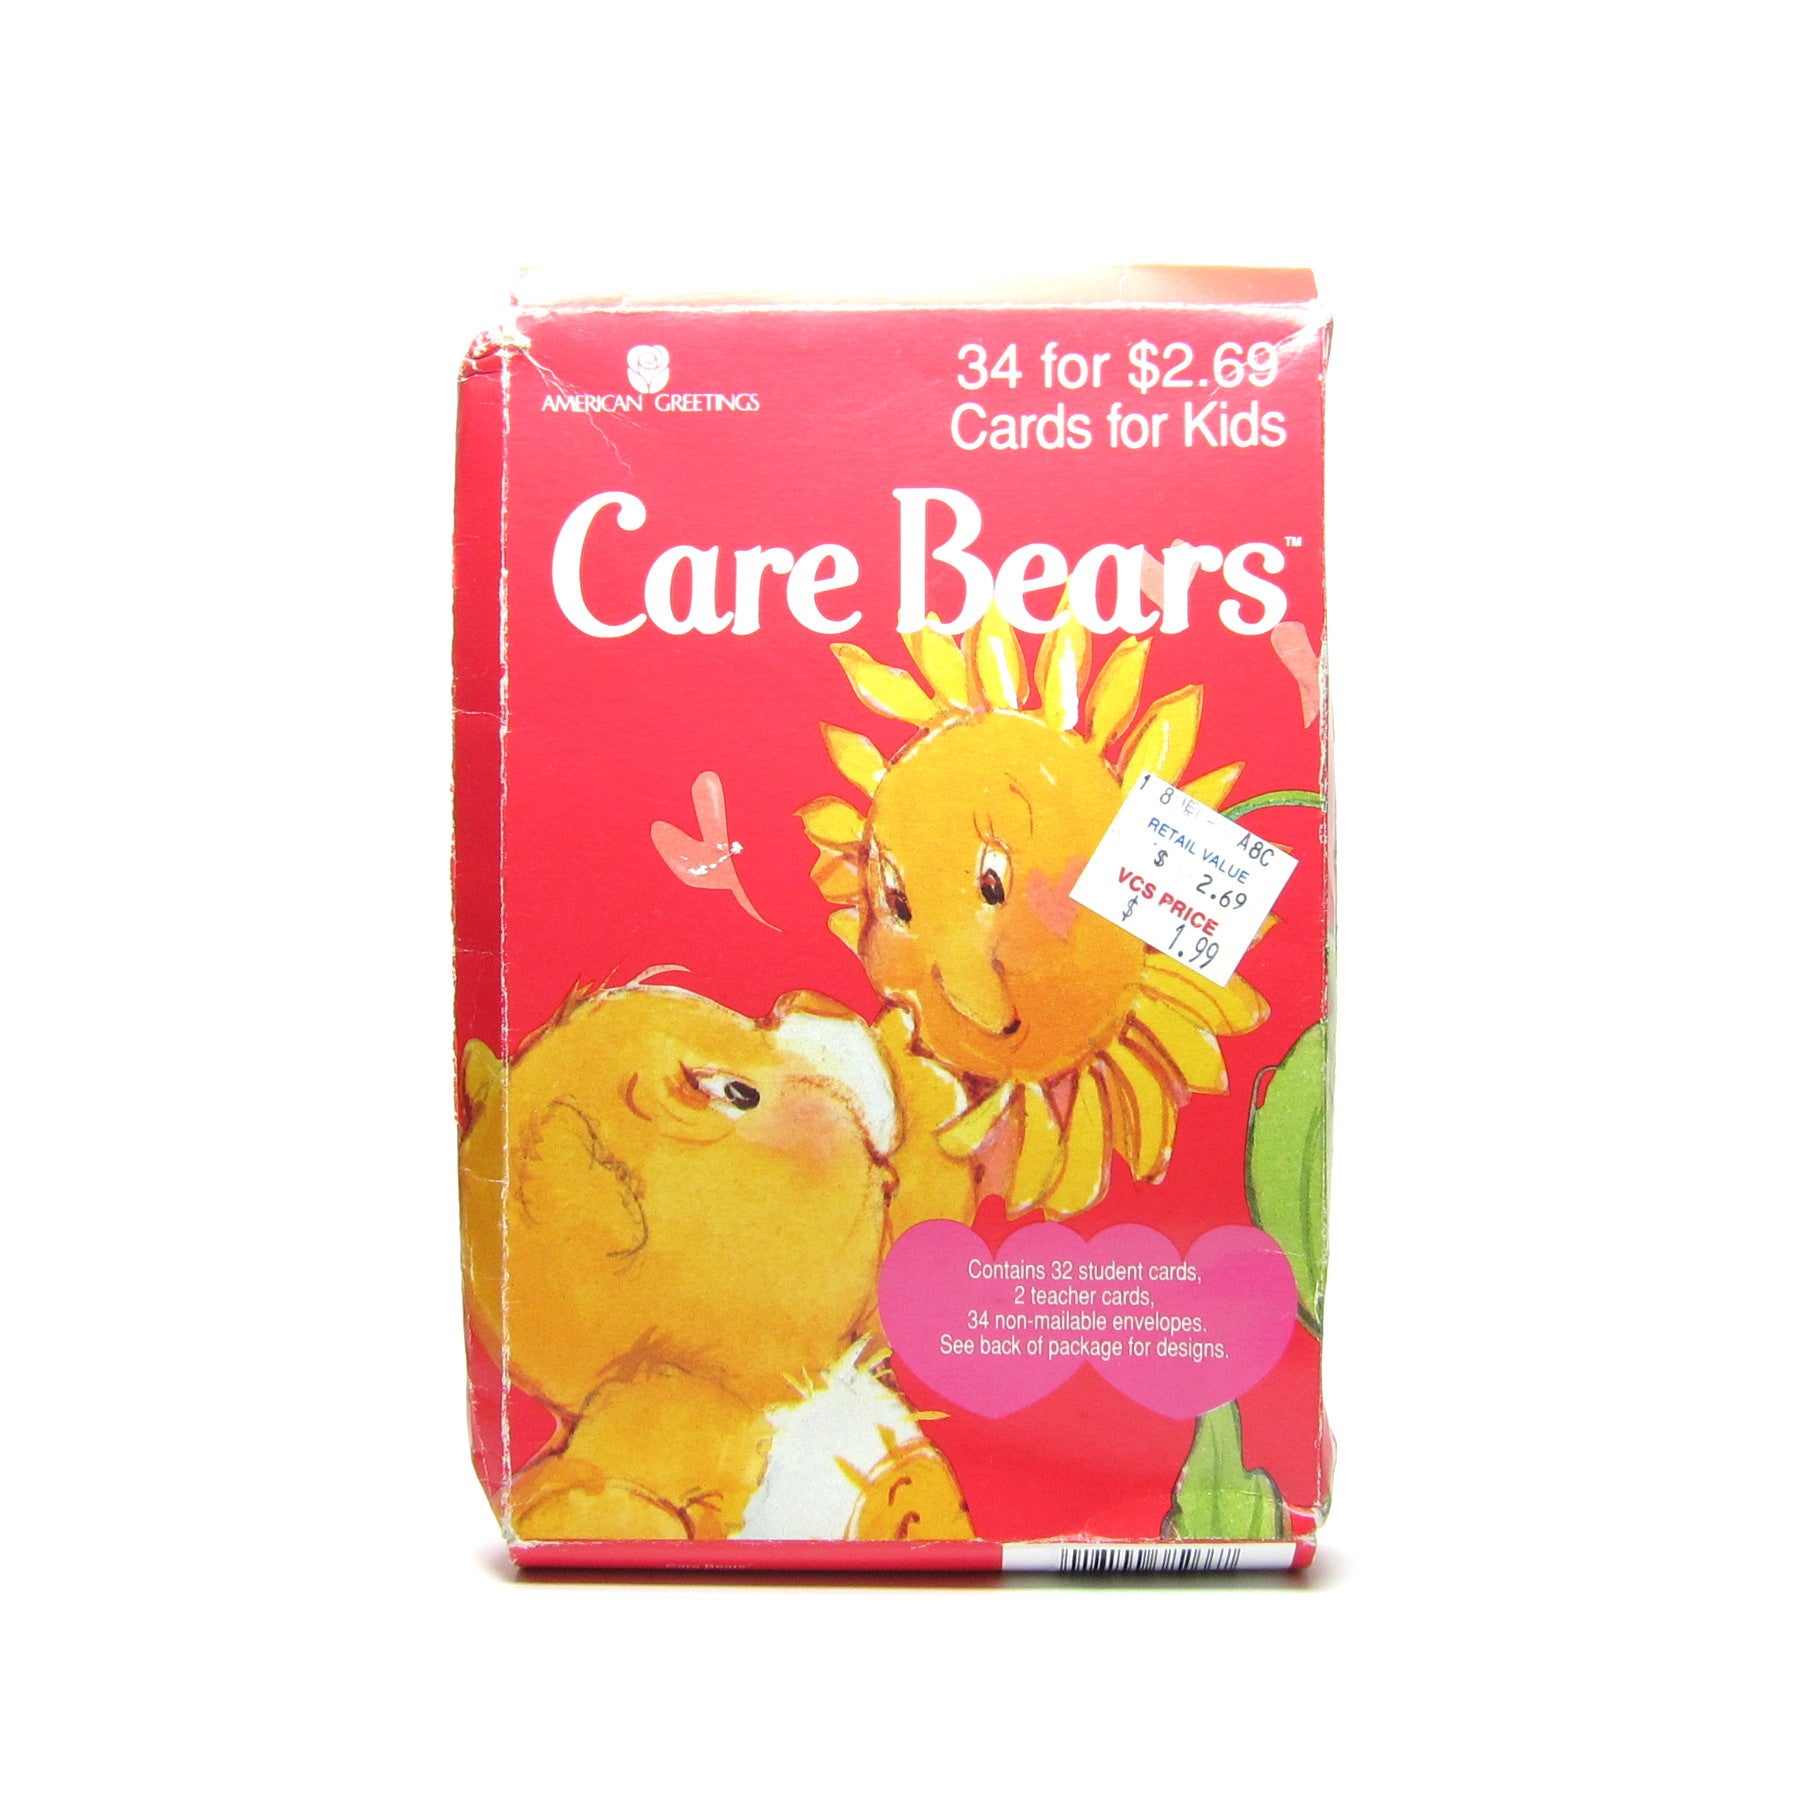 Care Bears vintage Valentine's Day cards